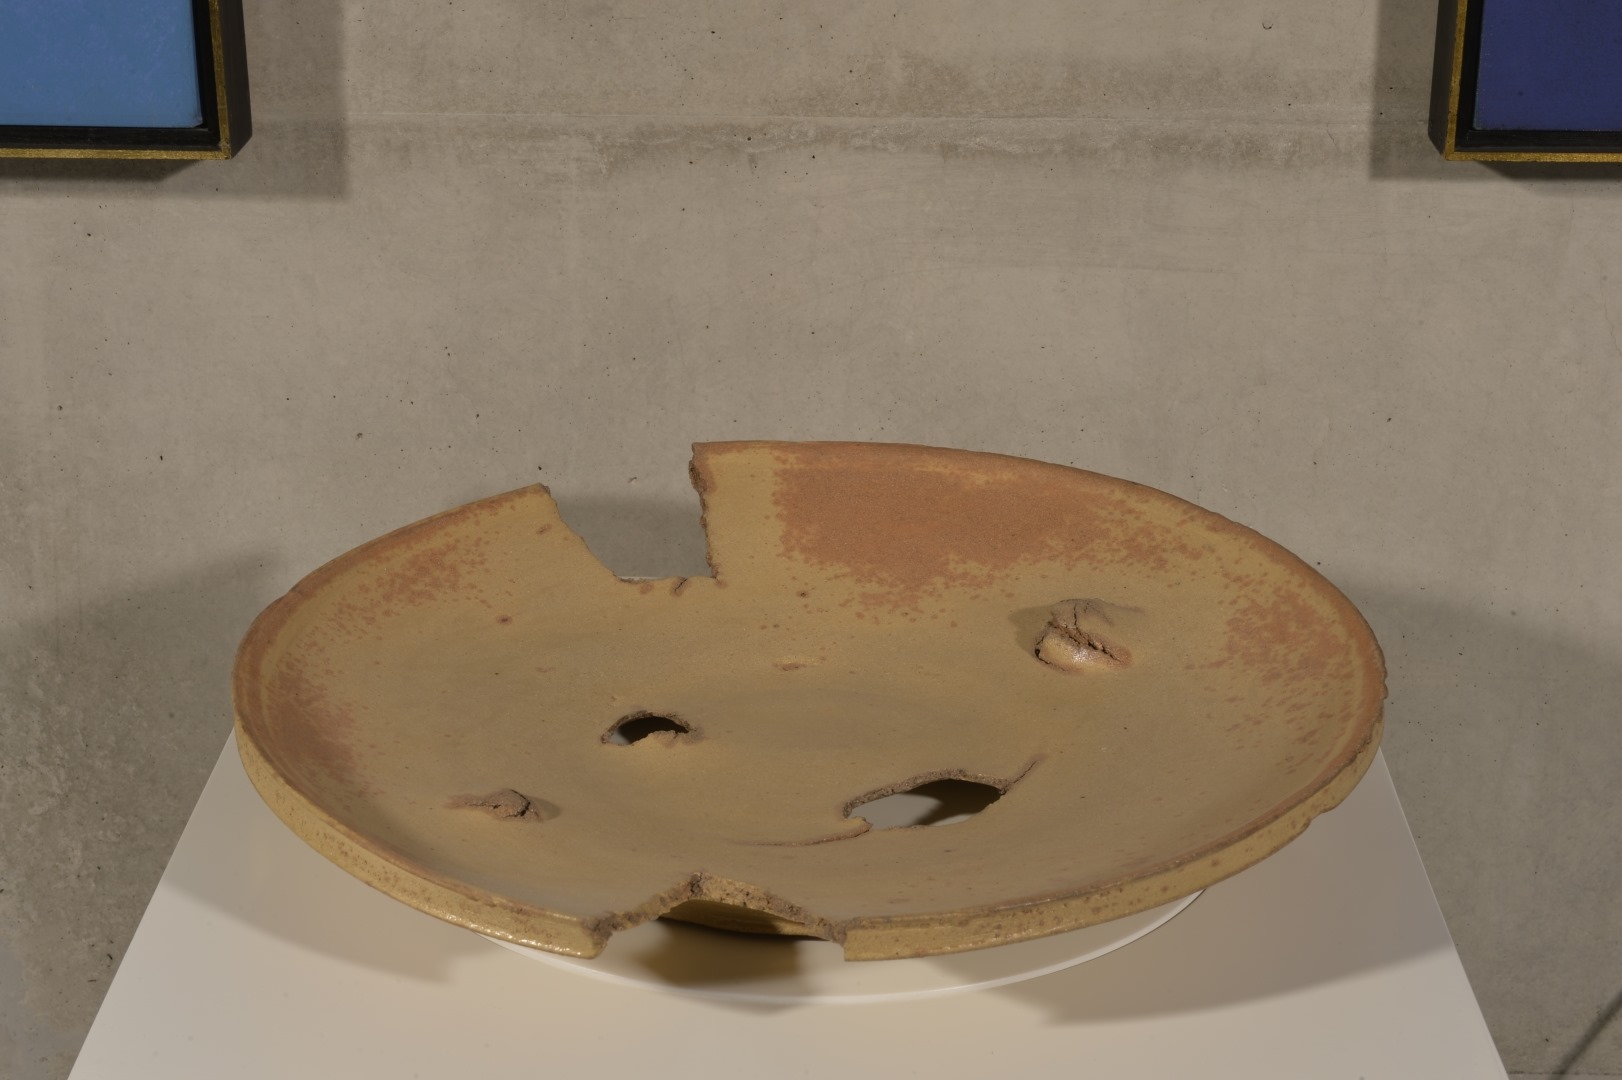 Untitled (Plate)